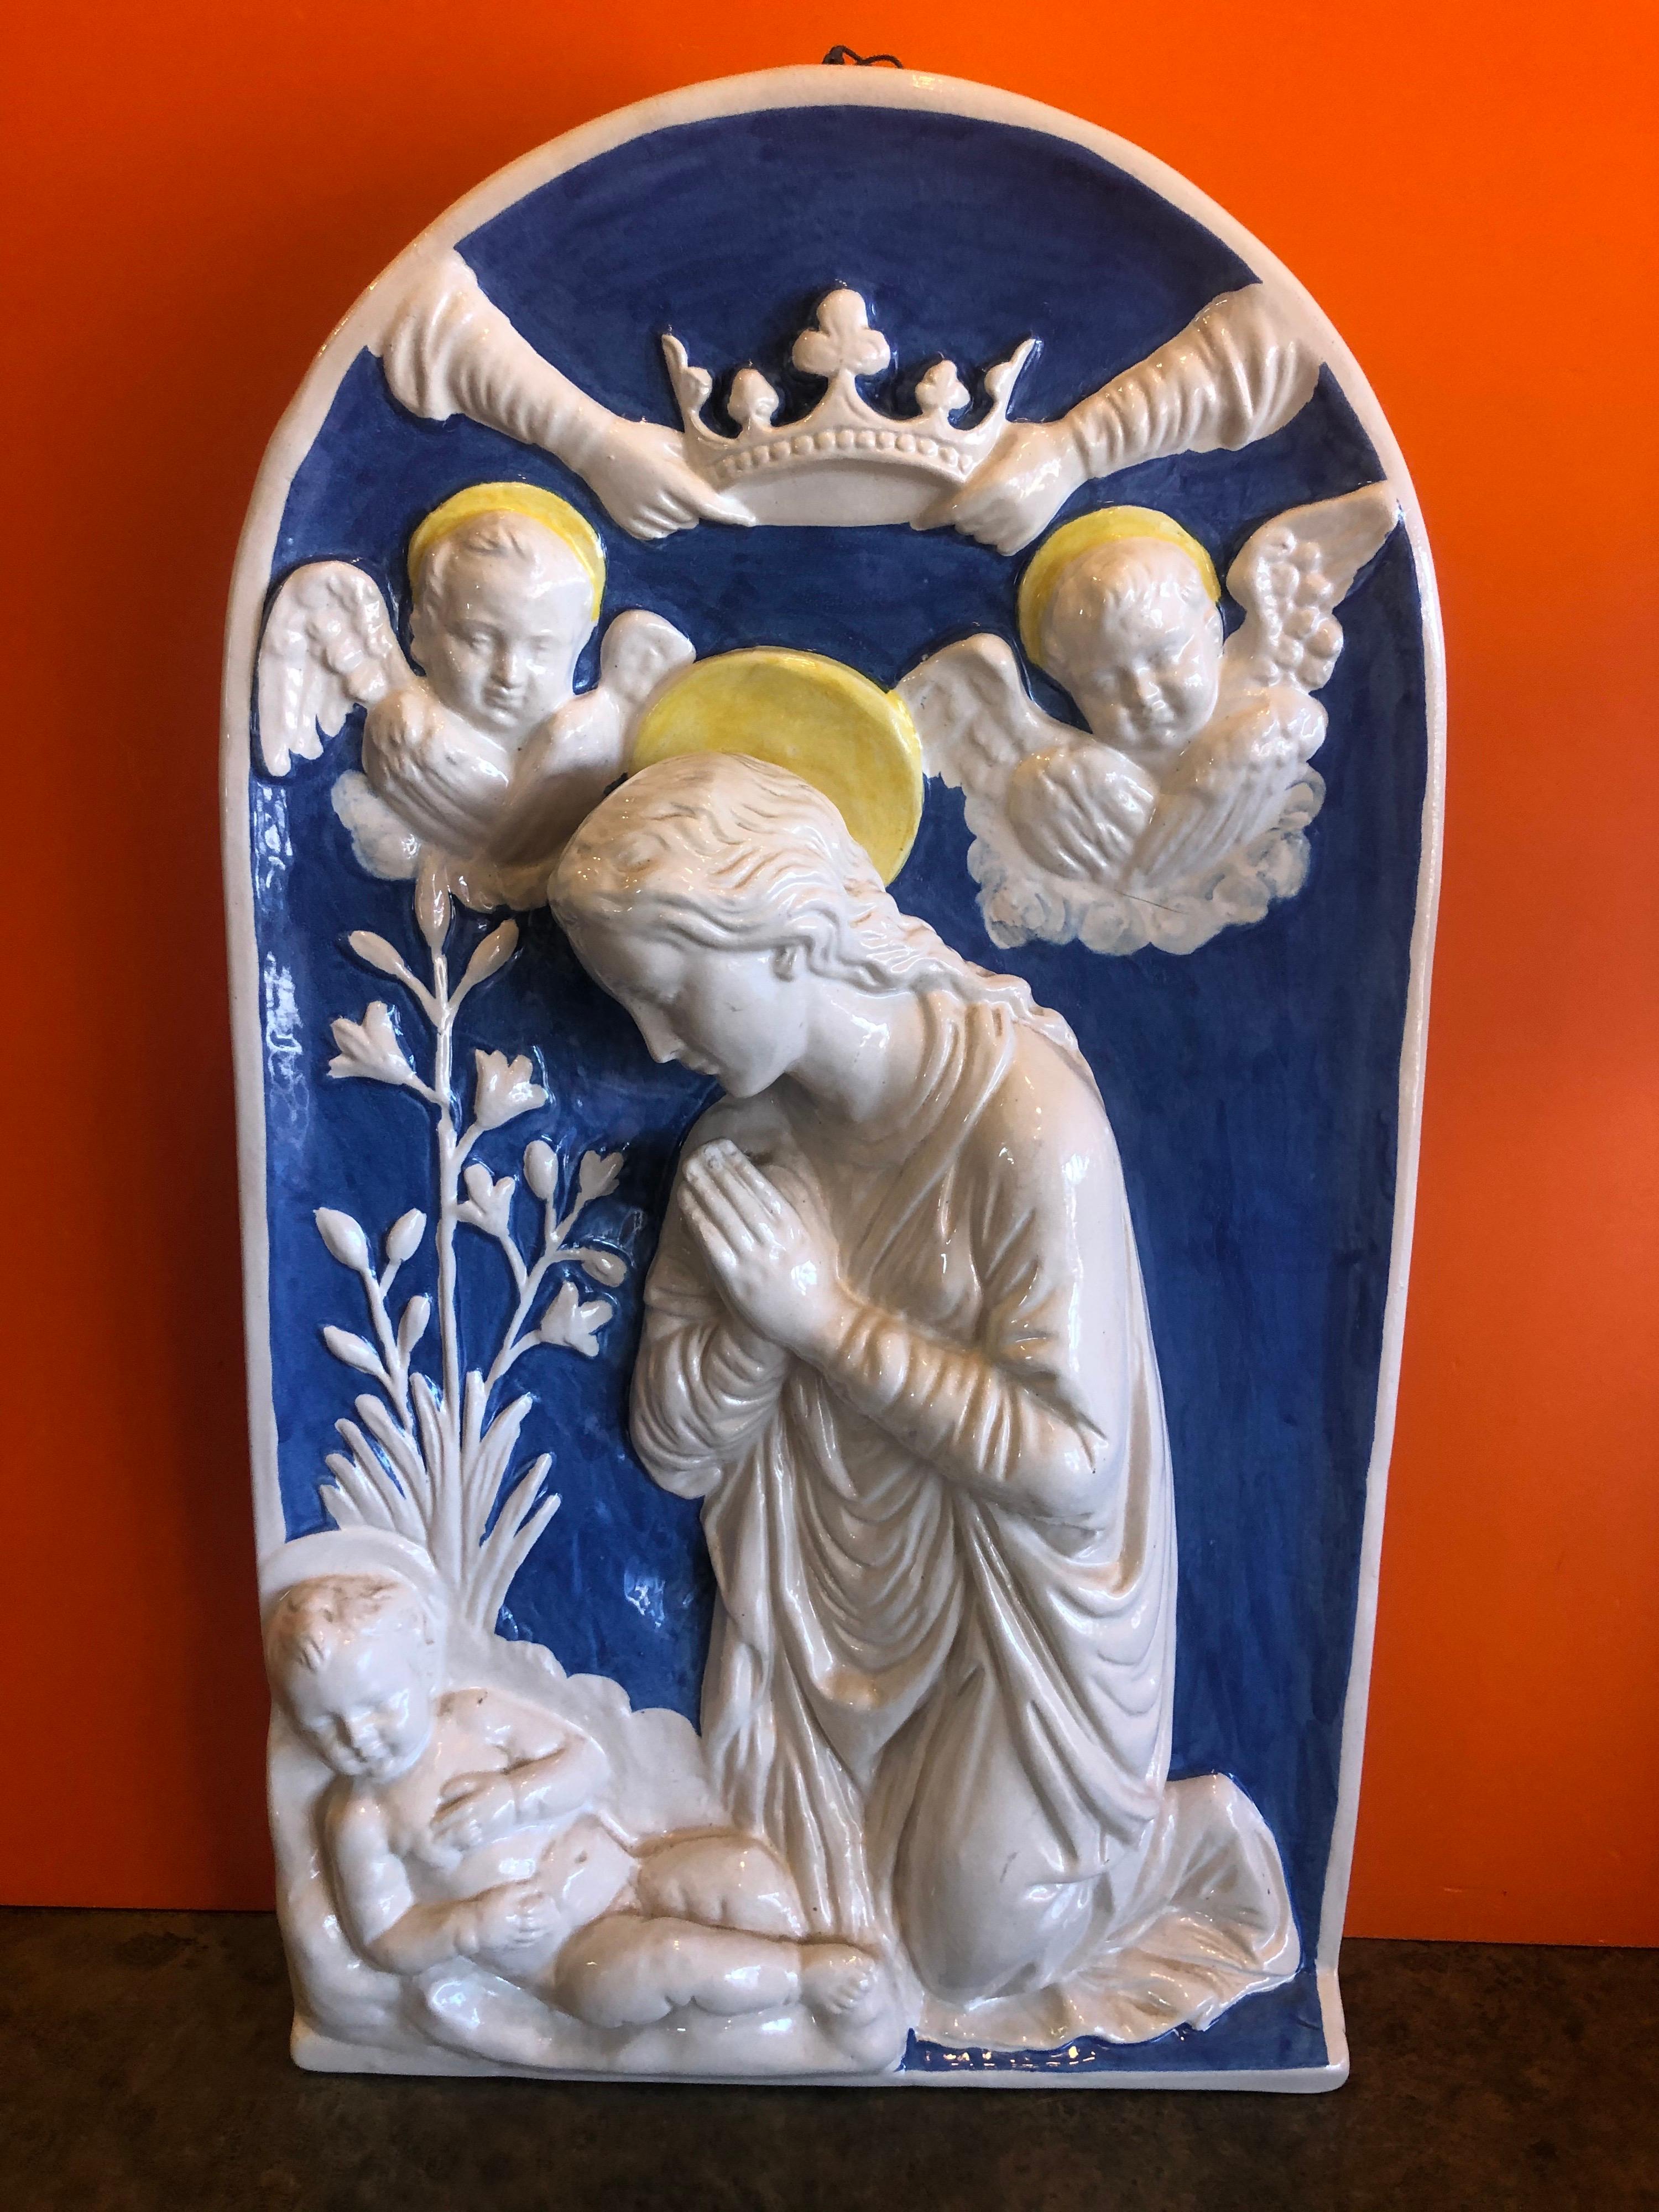 Rectangular high relief polychrome glazed pottery Madonna plaque by Della Robbia of Italy, circa 1980s. The neoclassical work depicts the Virgin Mary with Baby Jesus and two angels in a classic Della Robbia blue and white glaze. The piece is signed